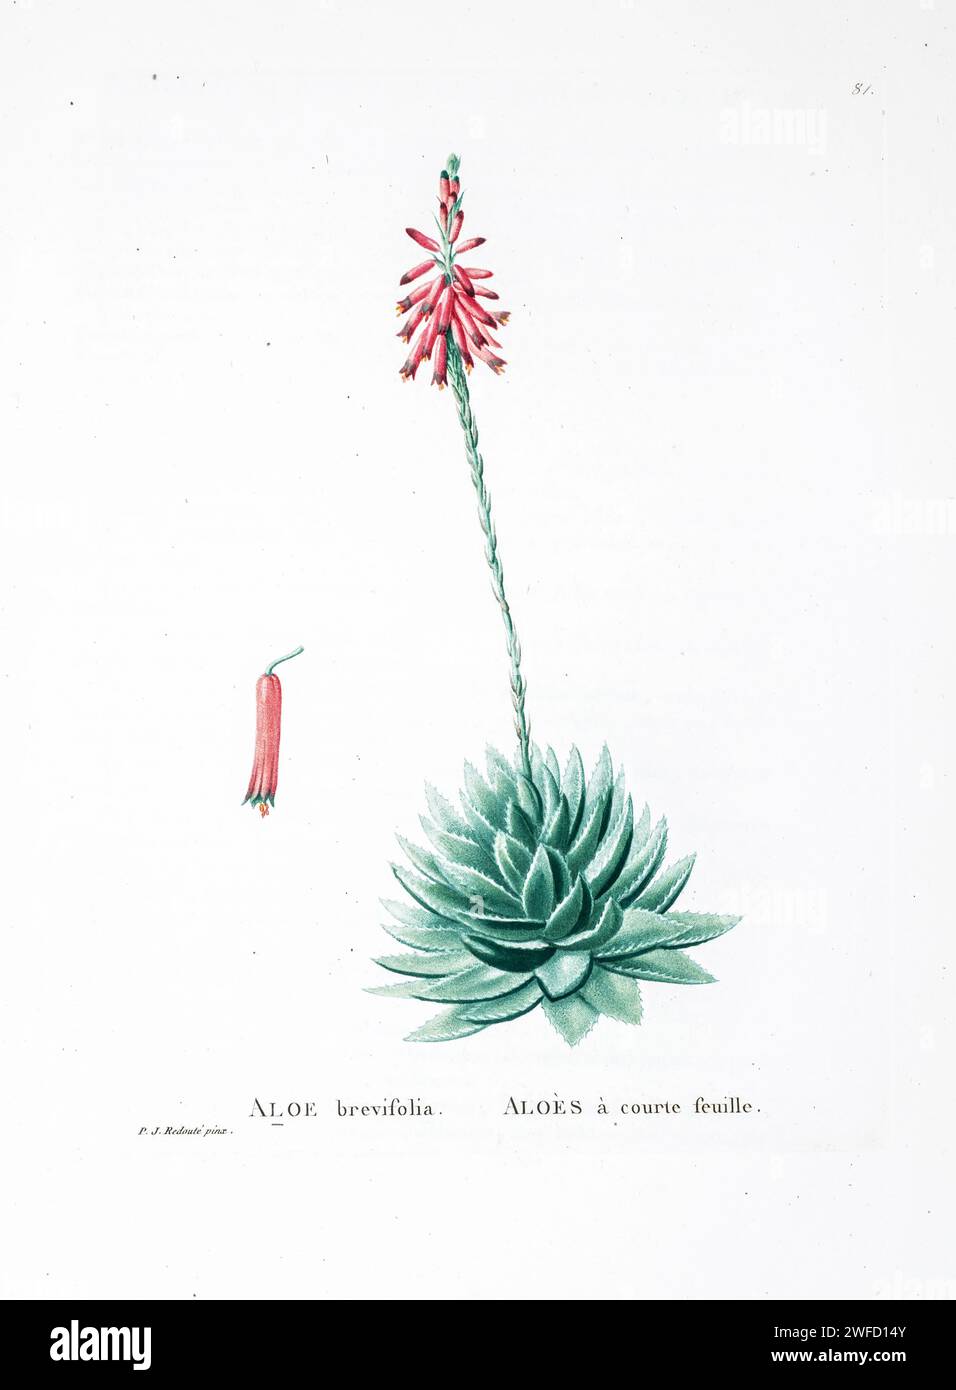 Aloe brevifolia from History of Succulent Plants [Plantarum historia succulentarum / Histoire des plantes grasses] painted by Pierre-Joseph Redouté and described by Augustin Pyramus de Candolle 1799  Aloe brevifolia, the short-leaved aloe, is a species of flowering plant in the family Asphodelaceae. It is a tiny, compact, blue-green evergreen succulent perennial, that is native to the Western Cape, South Africa Stock Photo